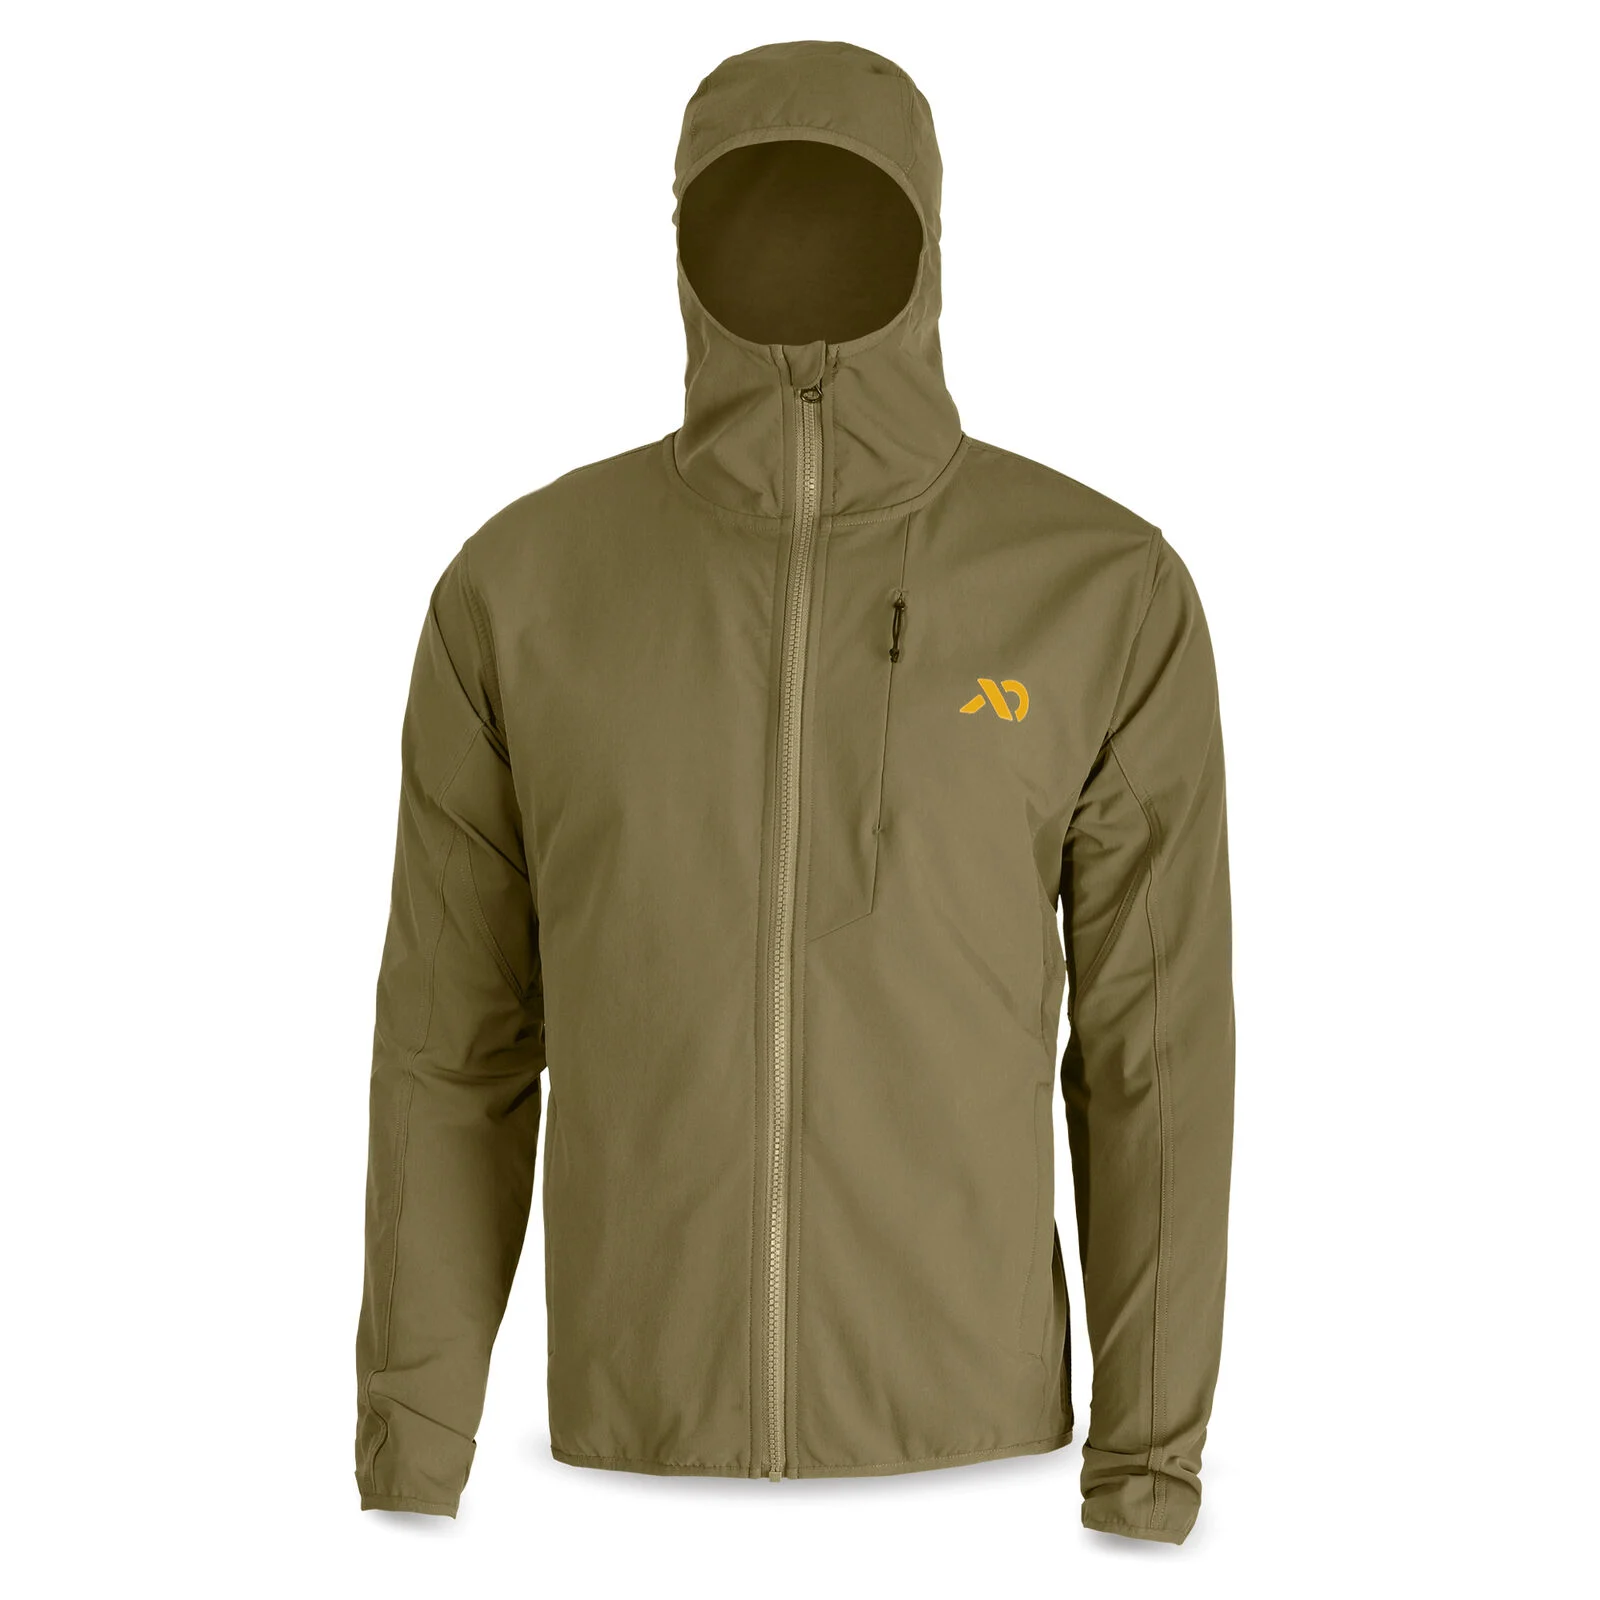 A first lite corrugated jacket - perfect christmas gift for a hunter!